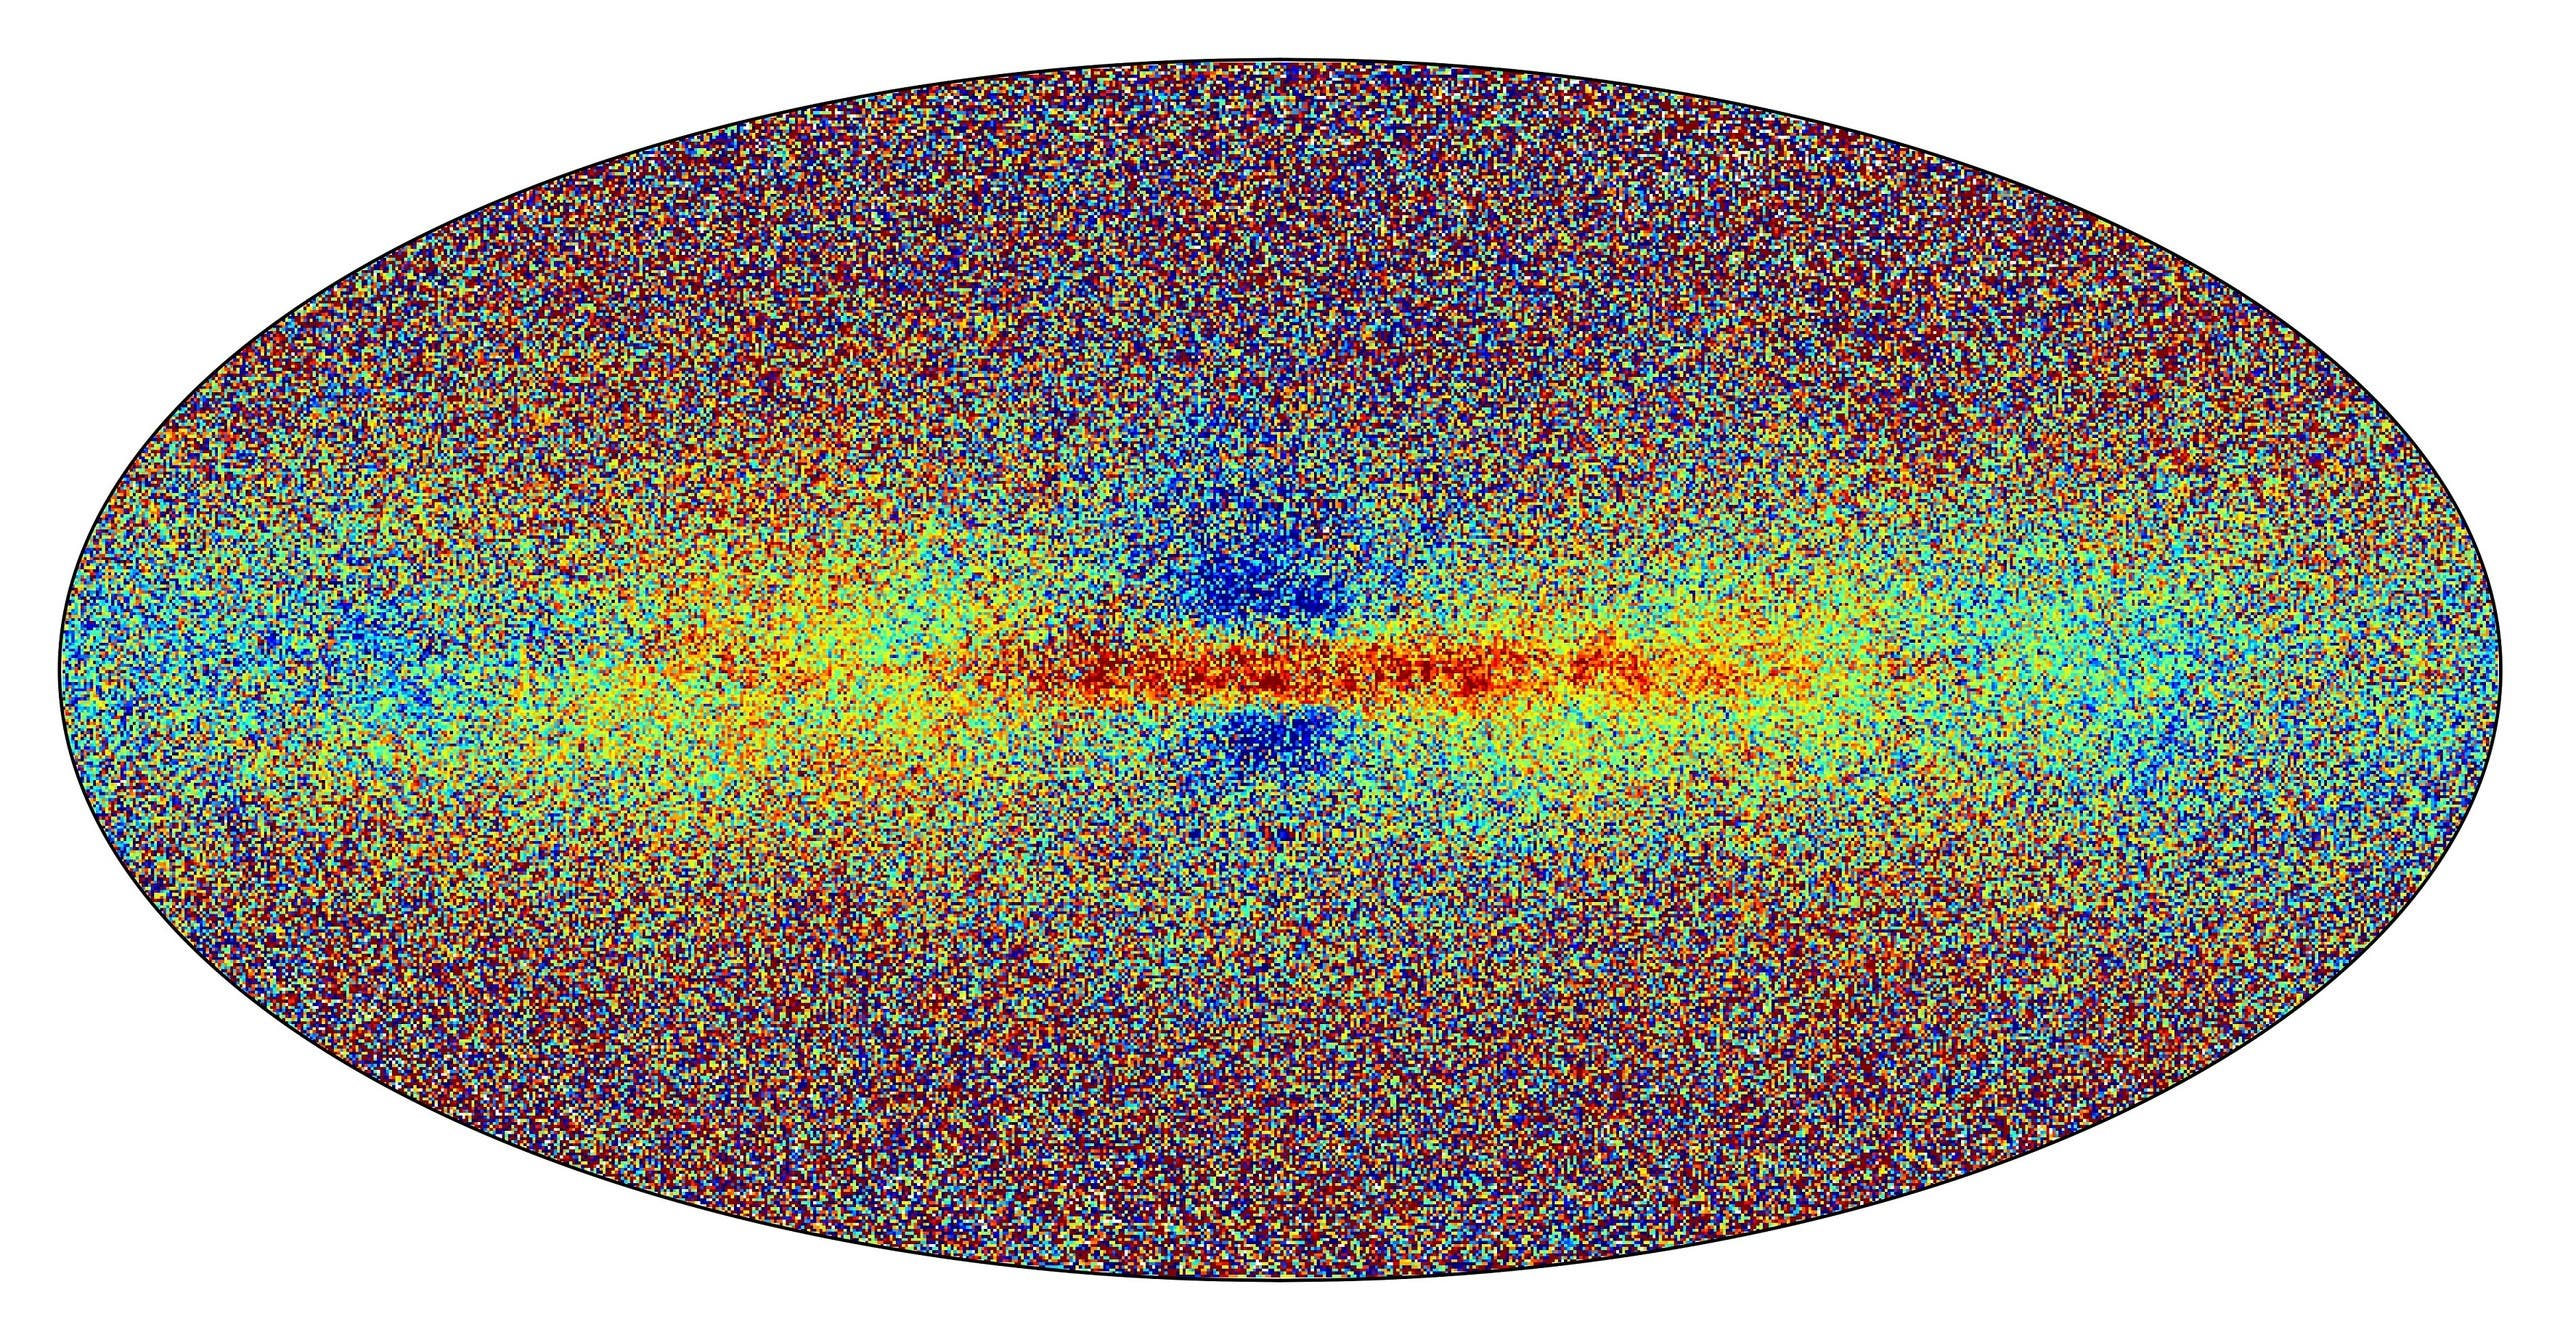 This handout image released by the European Space Agency (ESA) on June 13, 2022, shows a map of the Milky Way made with new data collected by the ESA space probe Gaia, showing a sample of the galaxy's stars in Gaia’s data release 3. The colour indicates the stellar metallicity. Redder stars are richer in metals. The Gaia space probe unveiled its latest discoveries on June 13, 2022, in its quest to map the Milky Way in unprecedented detail, surveying nearly two million stars and revealing mysterious starquakes which sweep across the fiery giants like vast tsunamis.